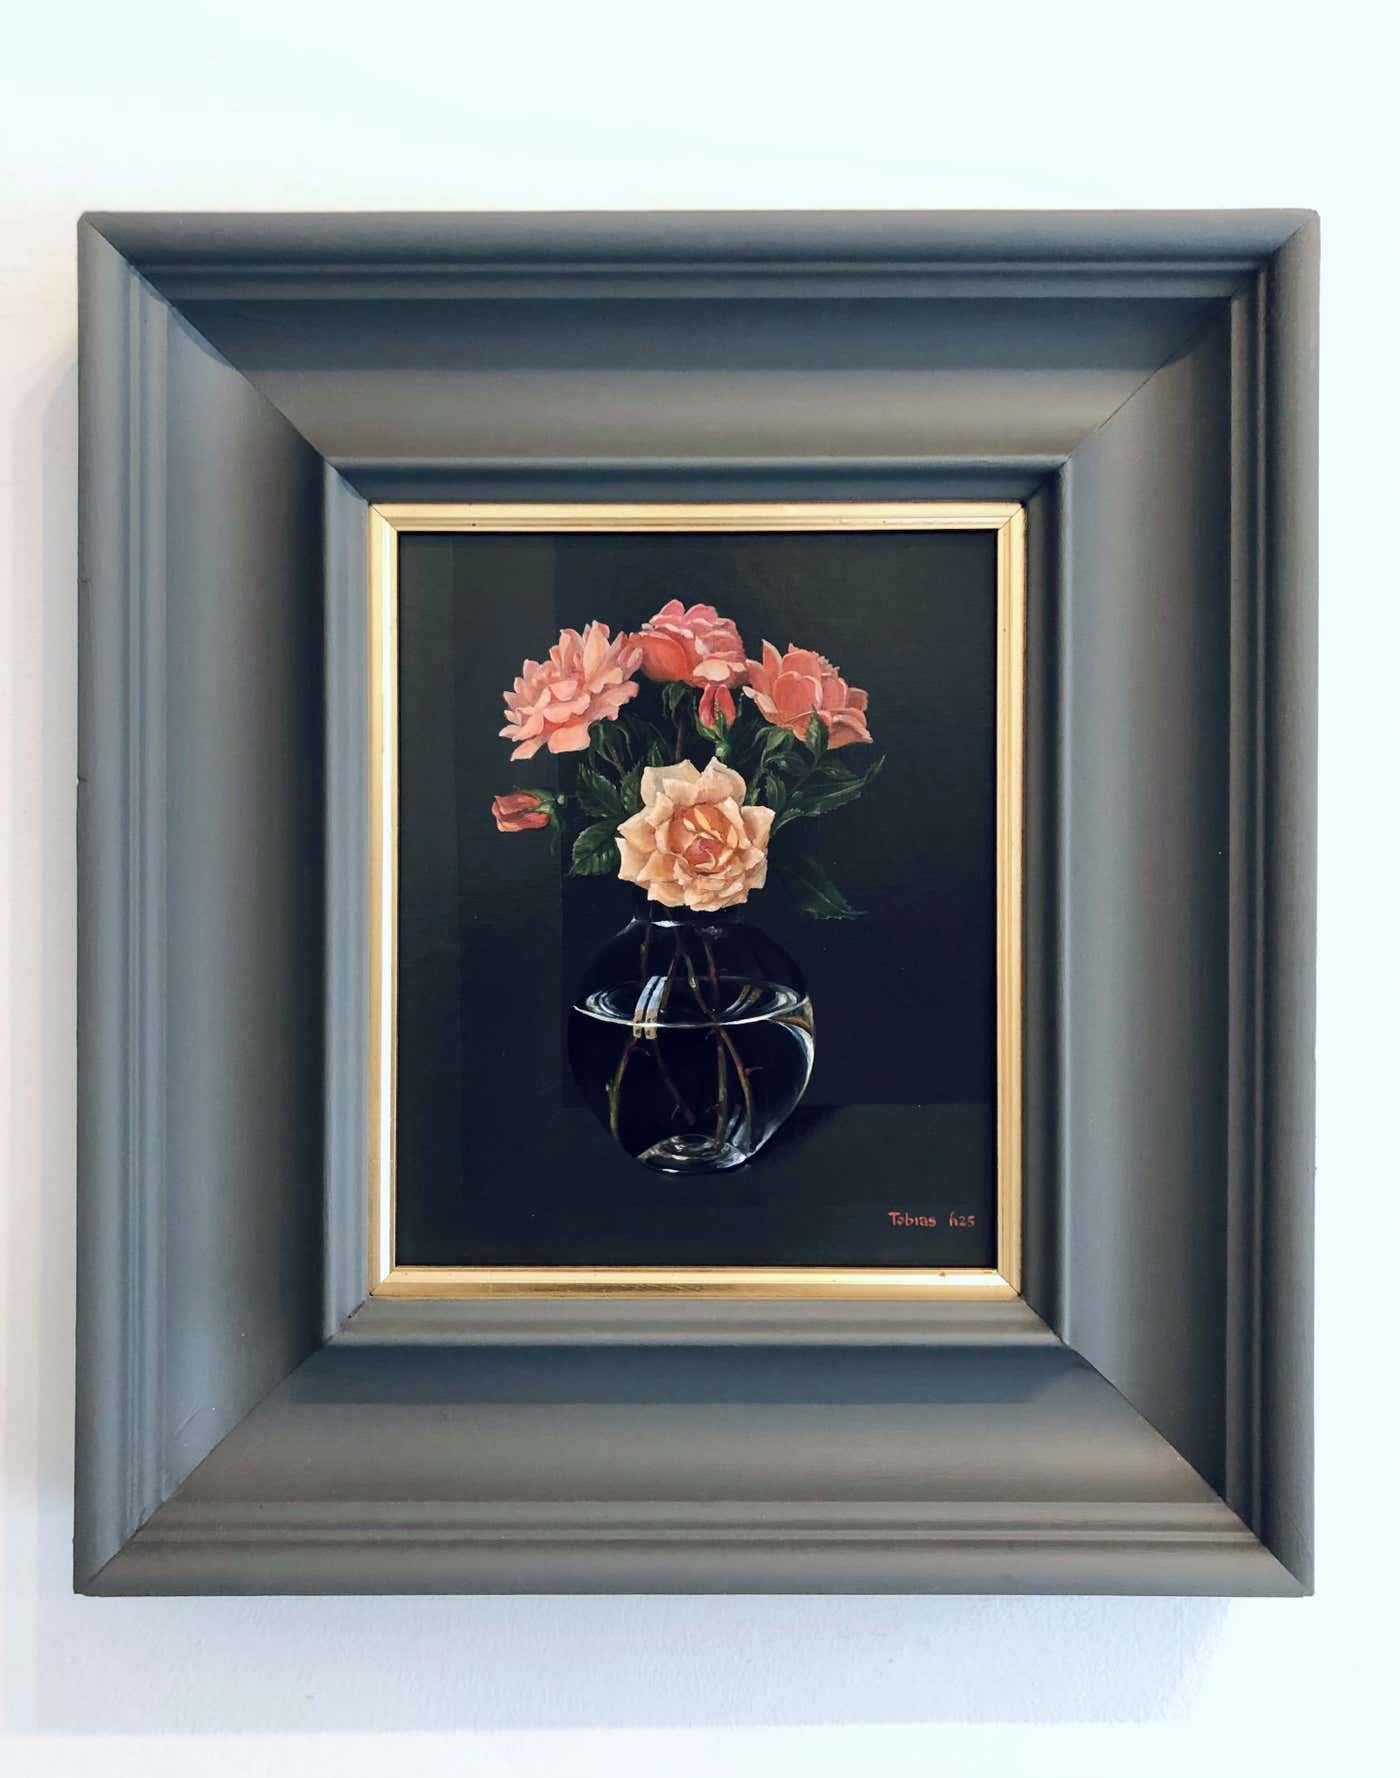 Roses from Rene-original hyper realism still life oil paintings-contemporary Art - Painting by Tobias Harrison